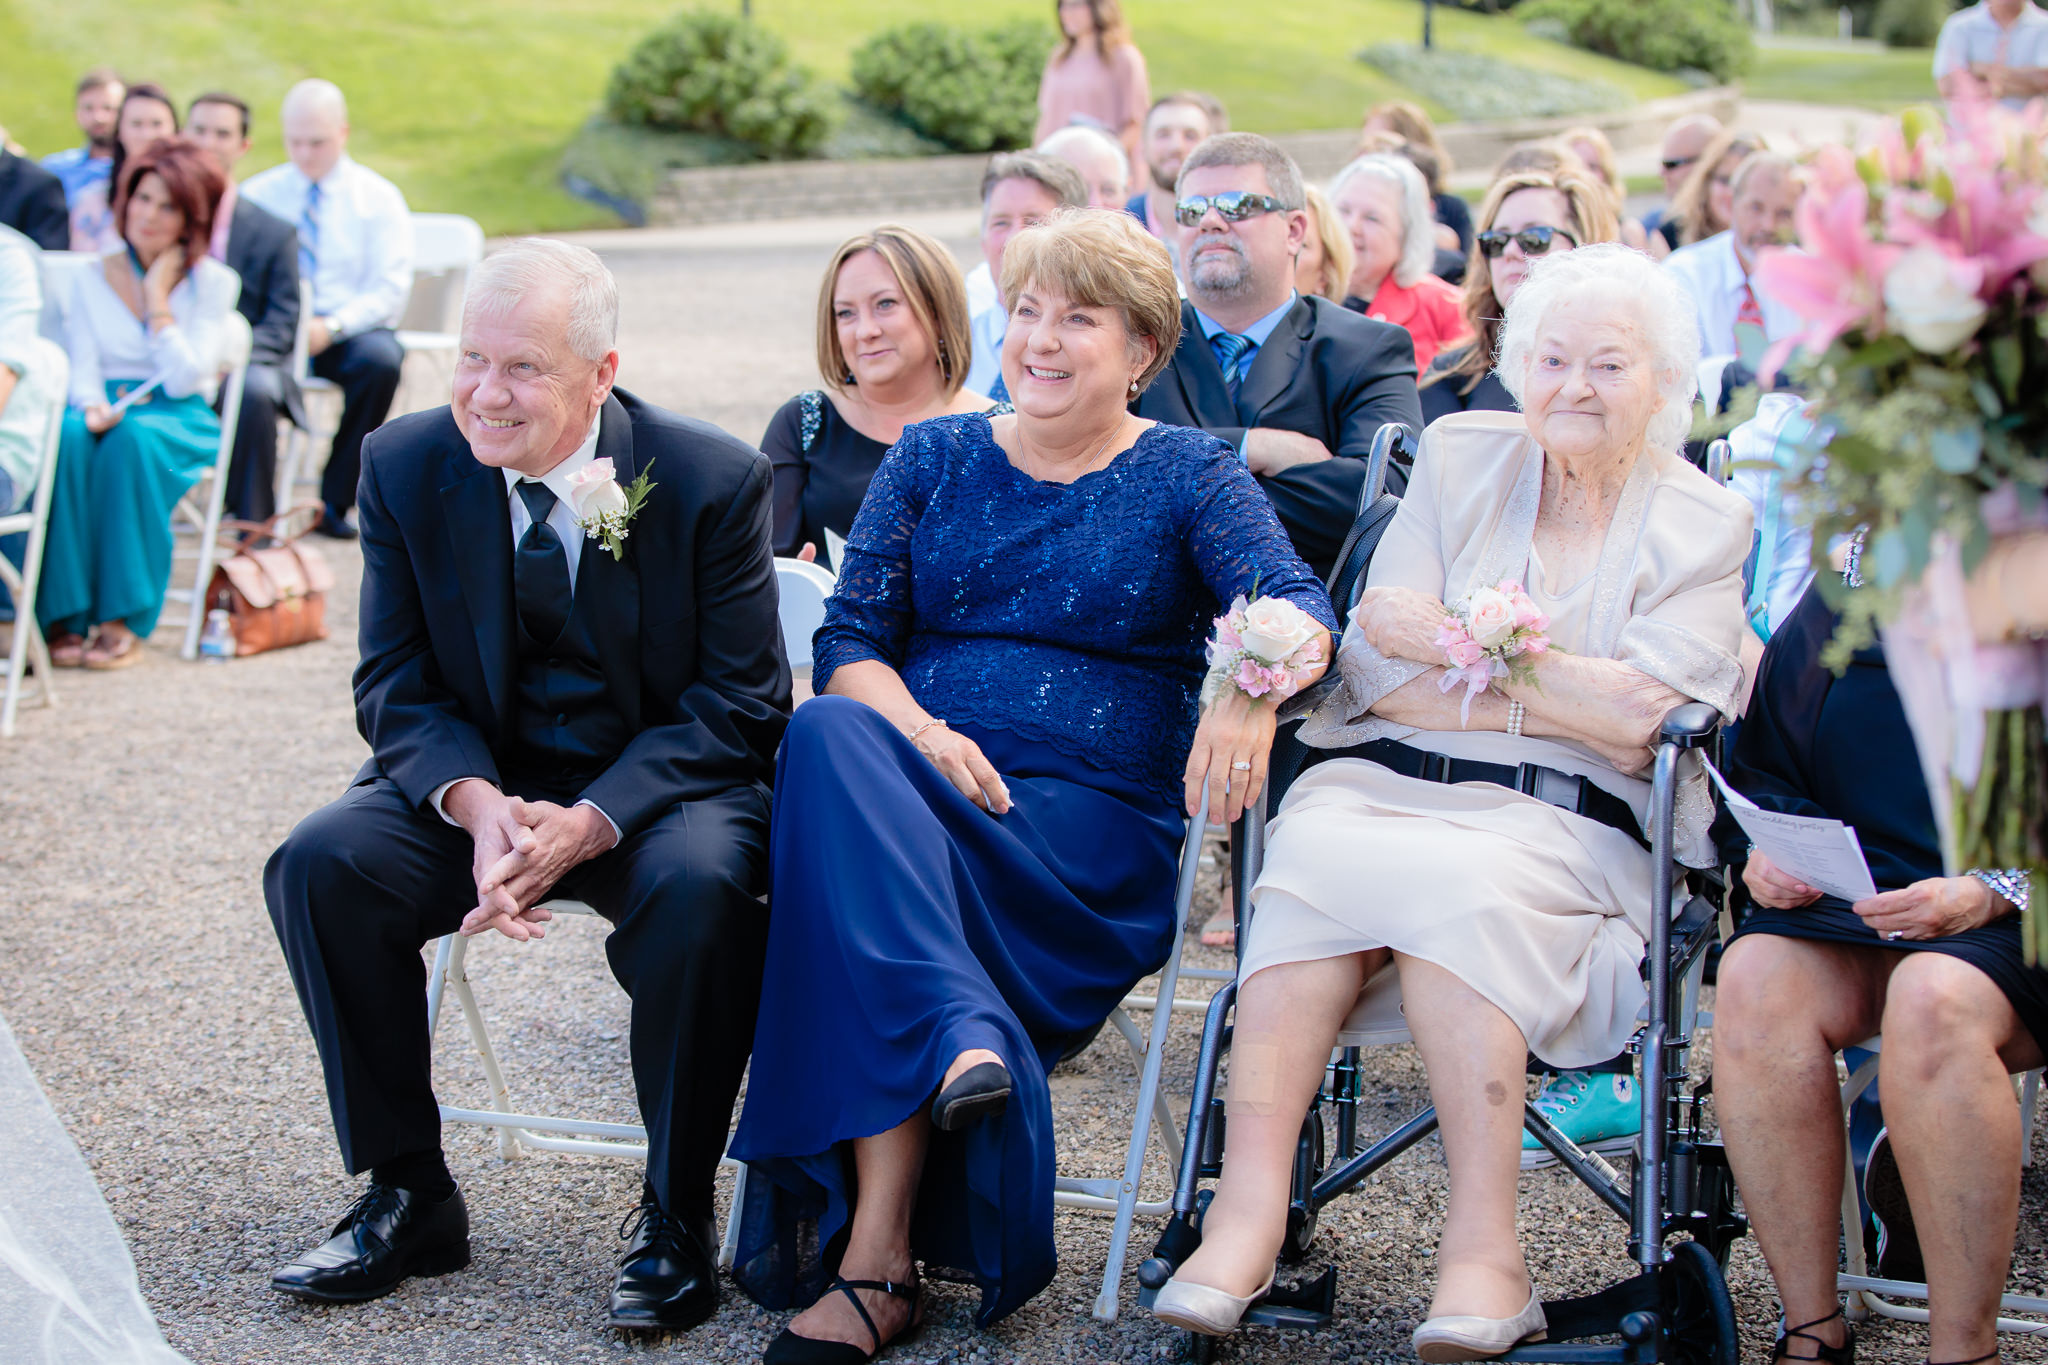 Parents & grandmother of the bride enjoy the ceremony at Greystone Fields